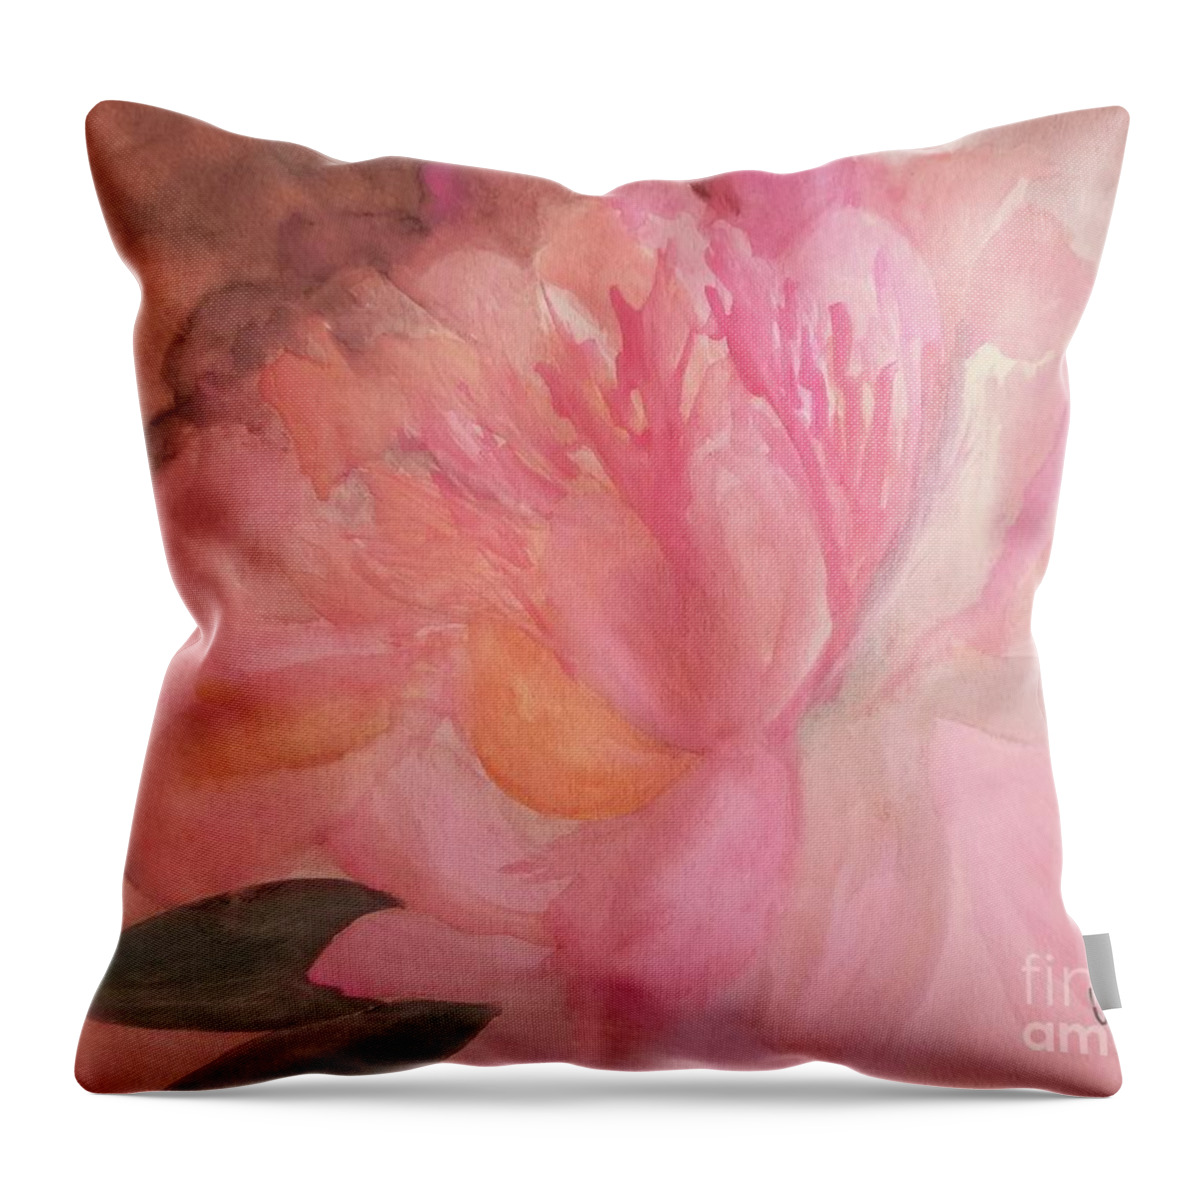 Pink Peony Throw Pillow featuring the painting Pink Peony #1 by Maria Urso